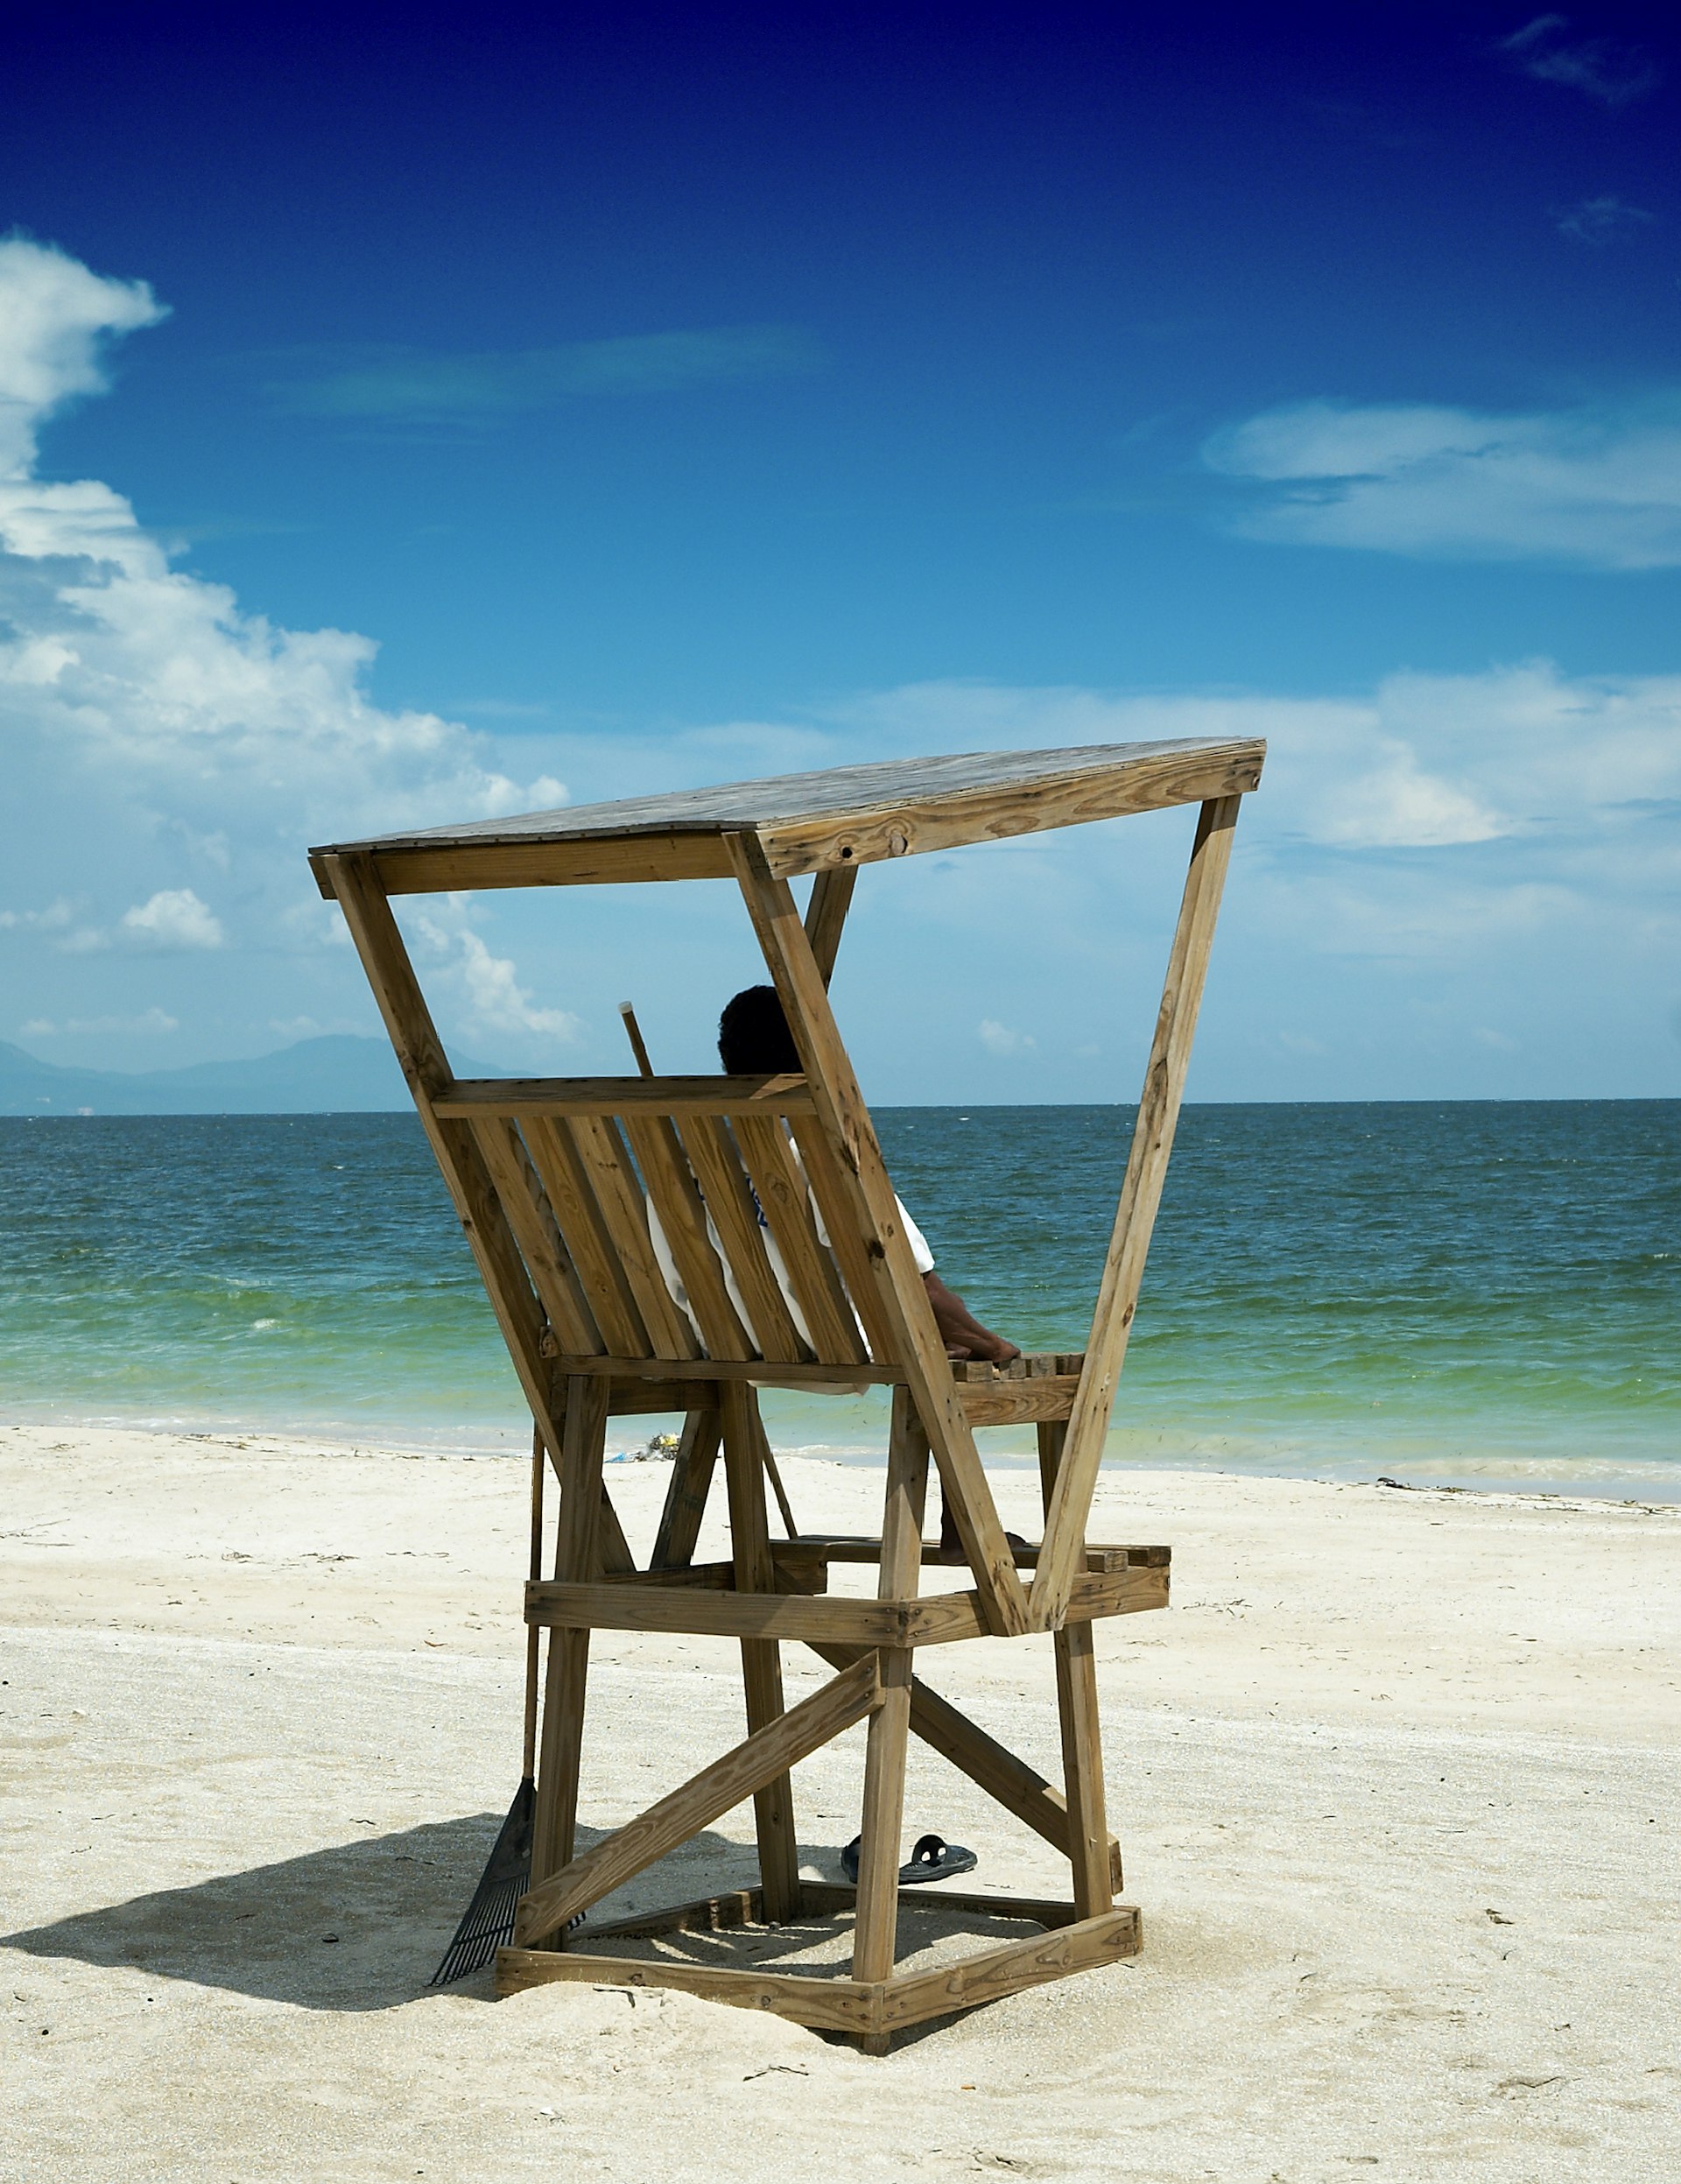 A person stares out to the ocean while sitting in a wooden lifeguard hut at Hellshire Beach in Jamaica